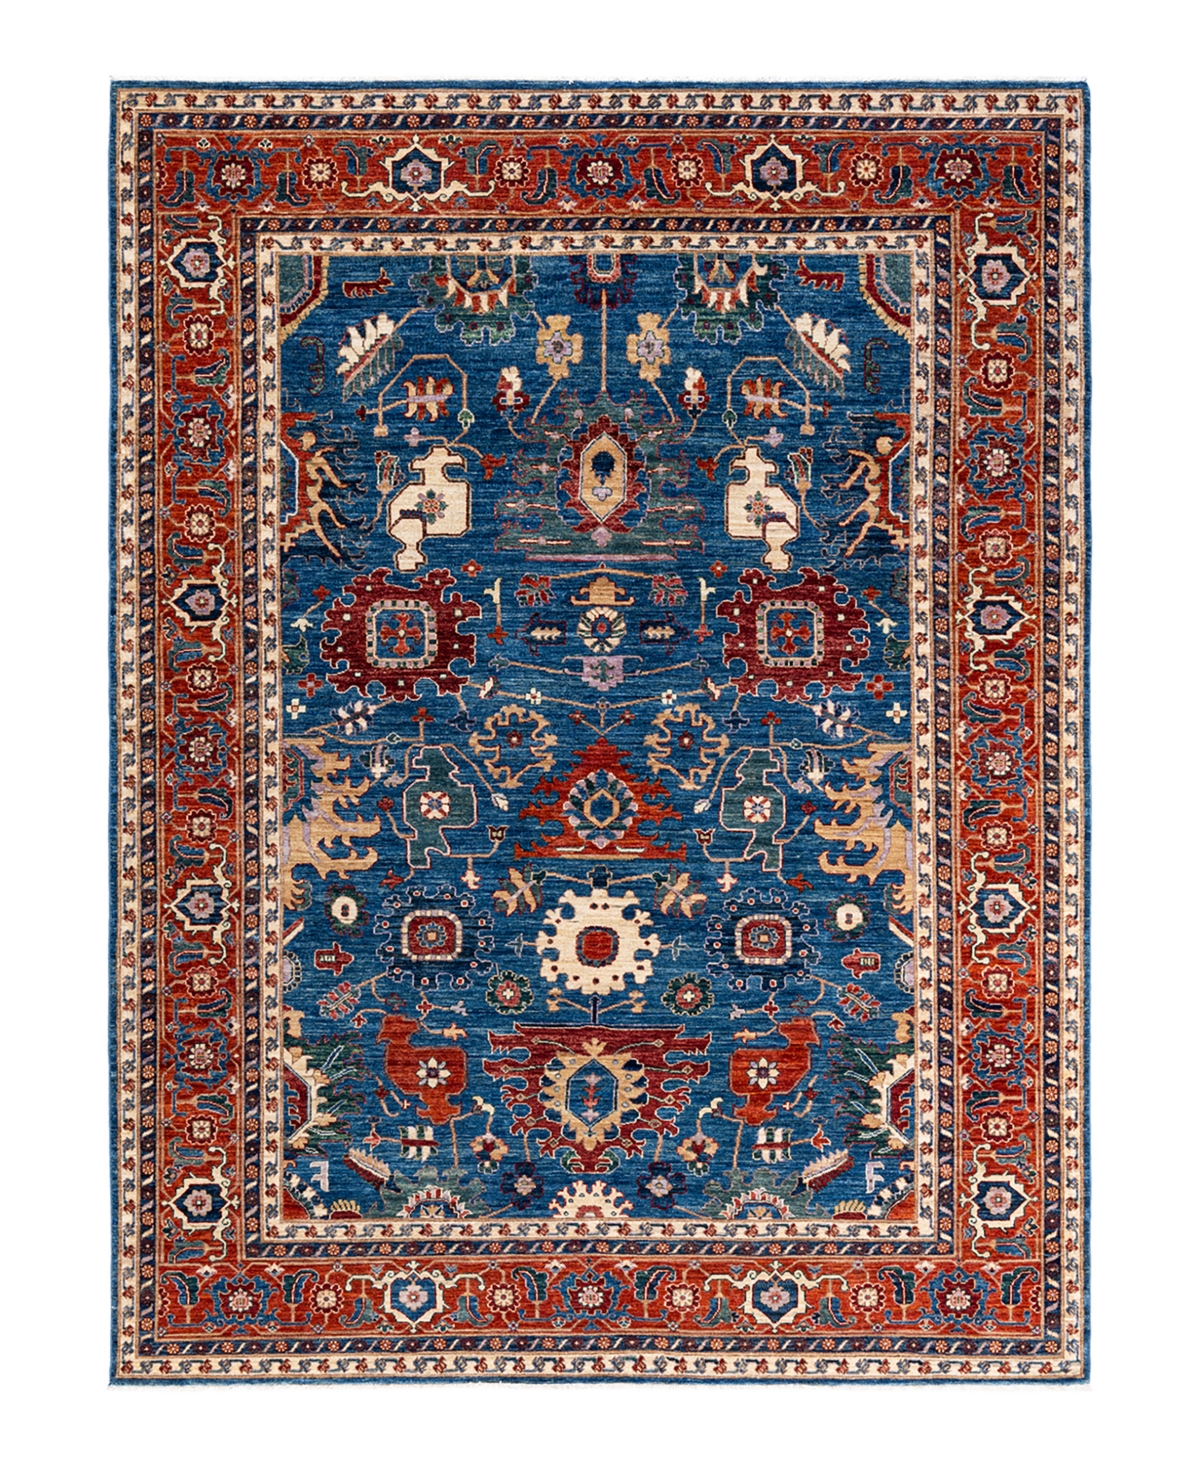 Adorn Hand Woven Rugs Tribal M1982 2'8" X 3'9" Area Rug In Mist